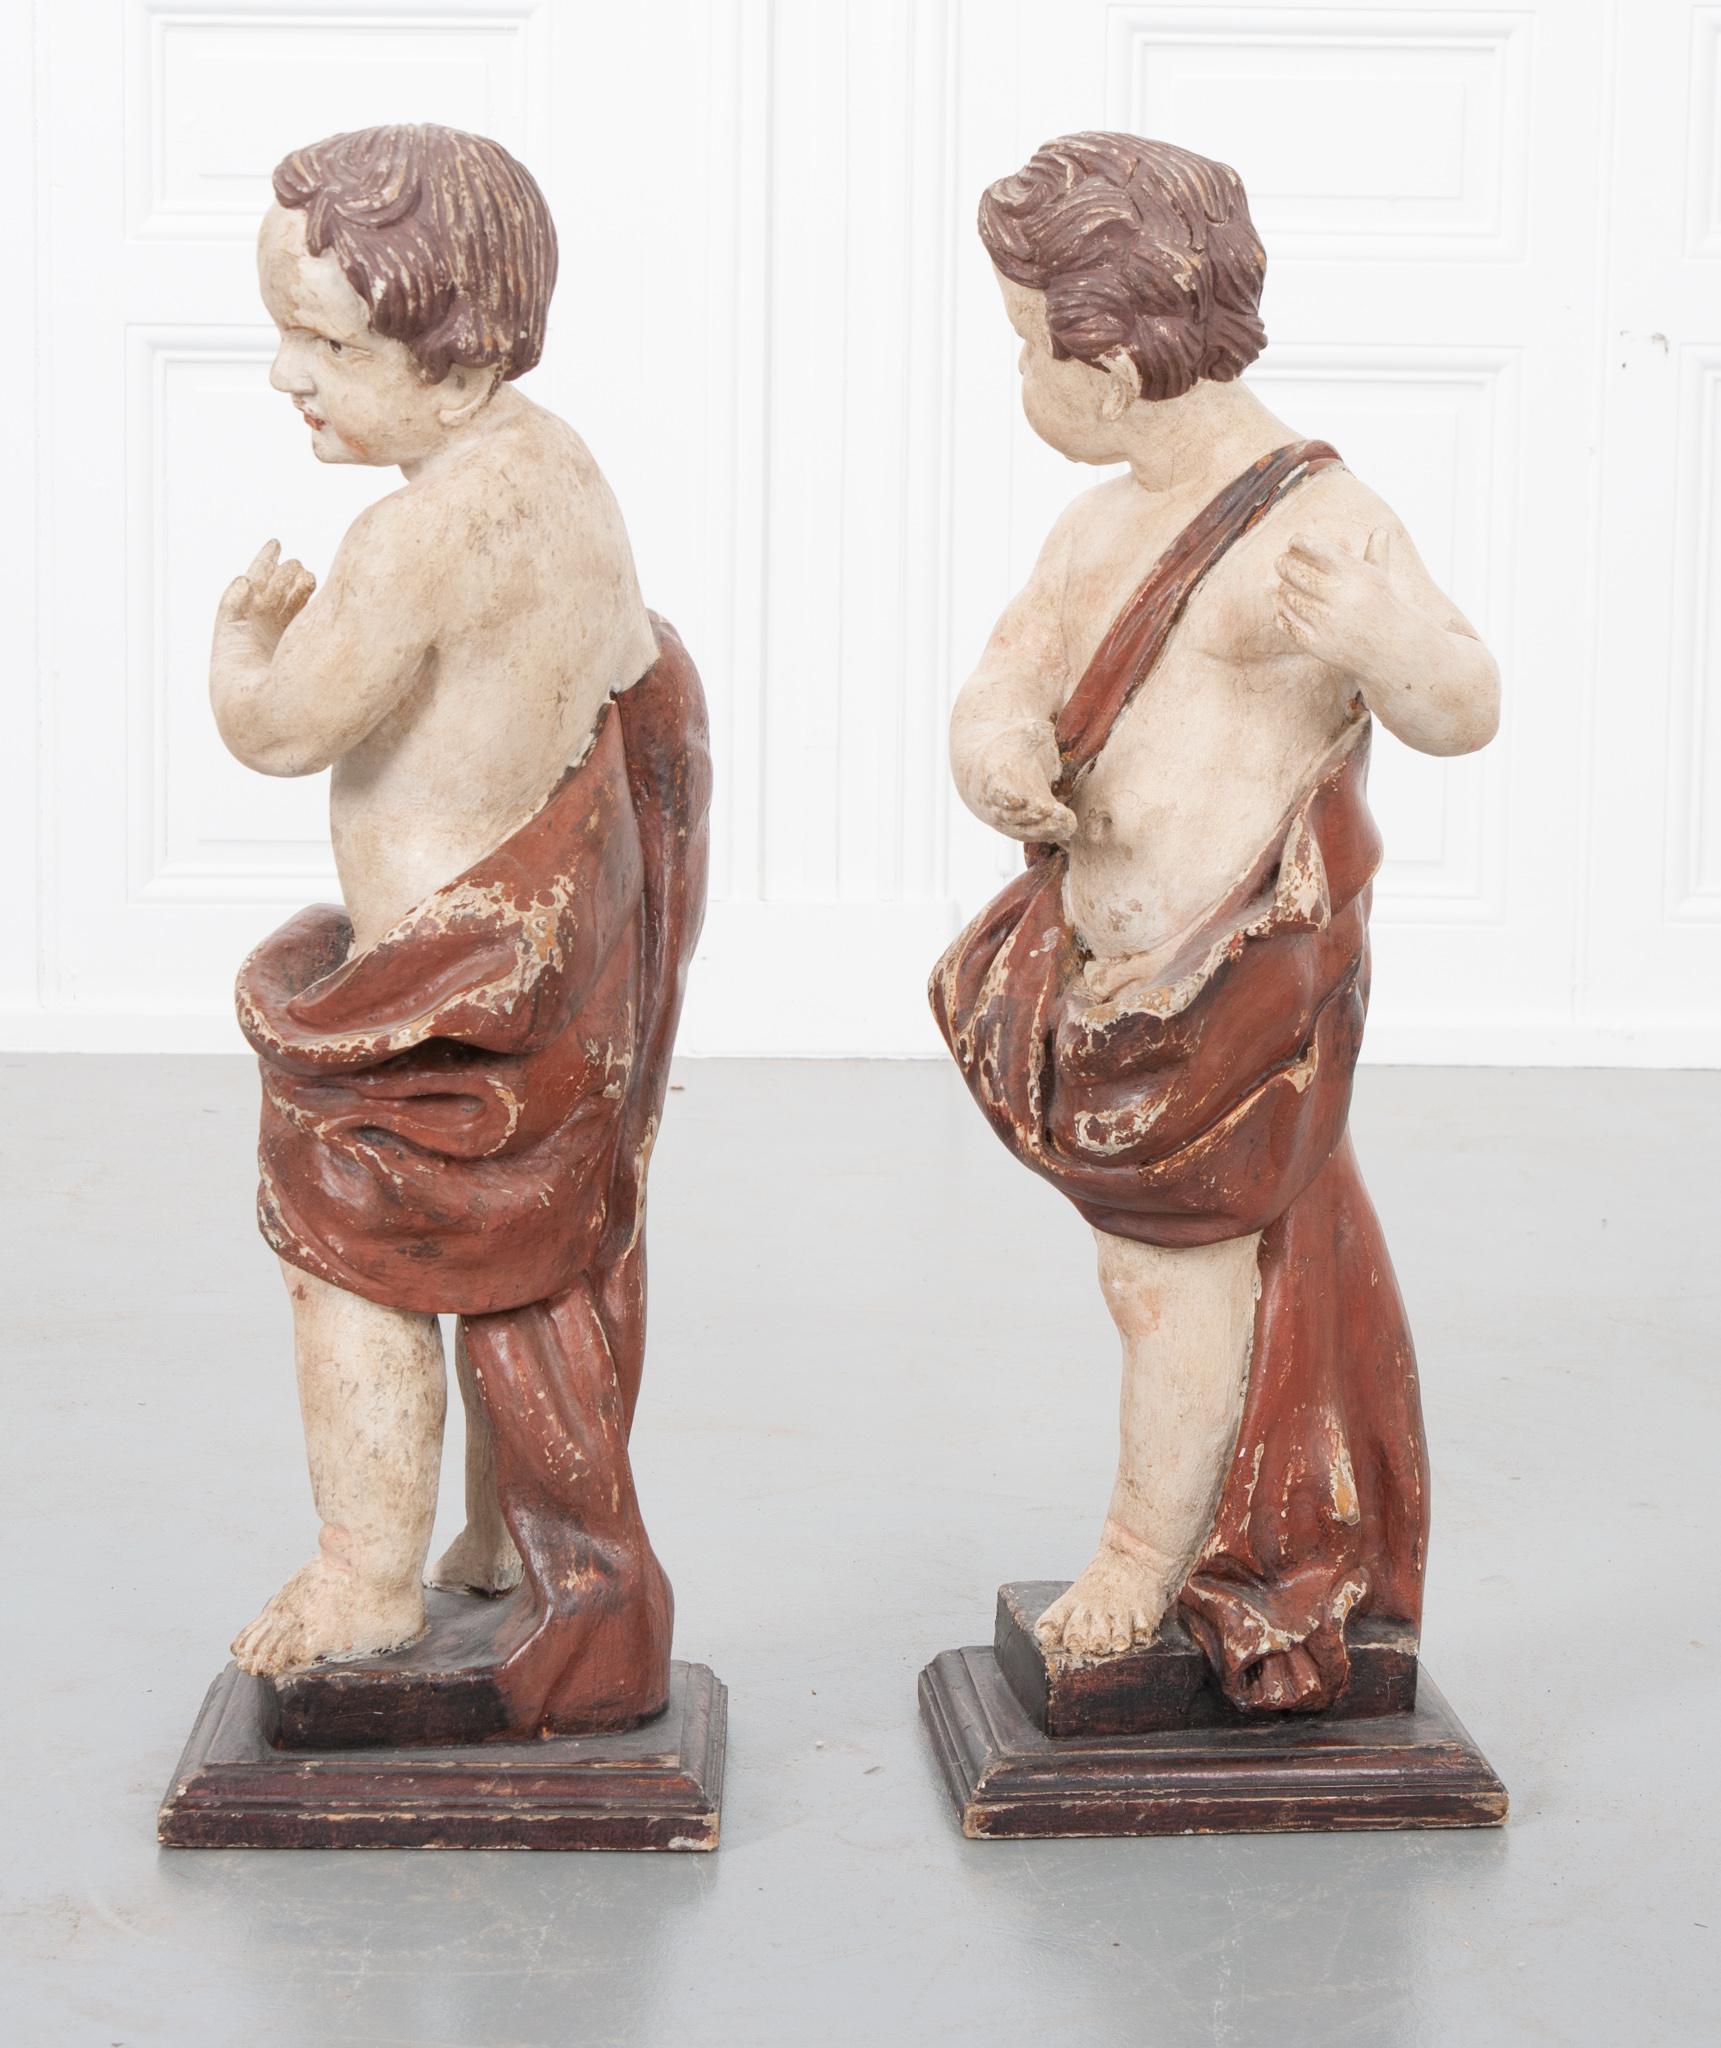 This 19th century Italian pair are hand carved, hand painted and retain their original paint. Not to be confused with cherubs, Putti are the sometimes winged statues or representations of male children and represent secular passion. The pair have